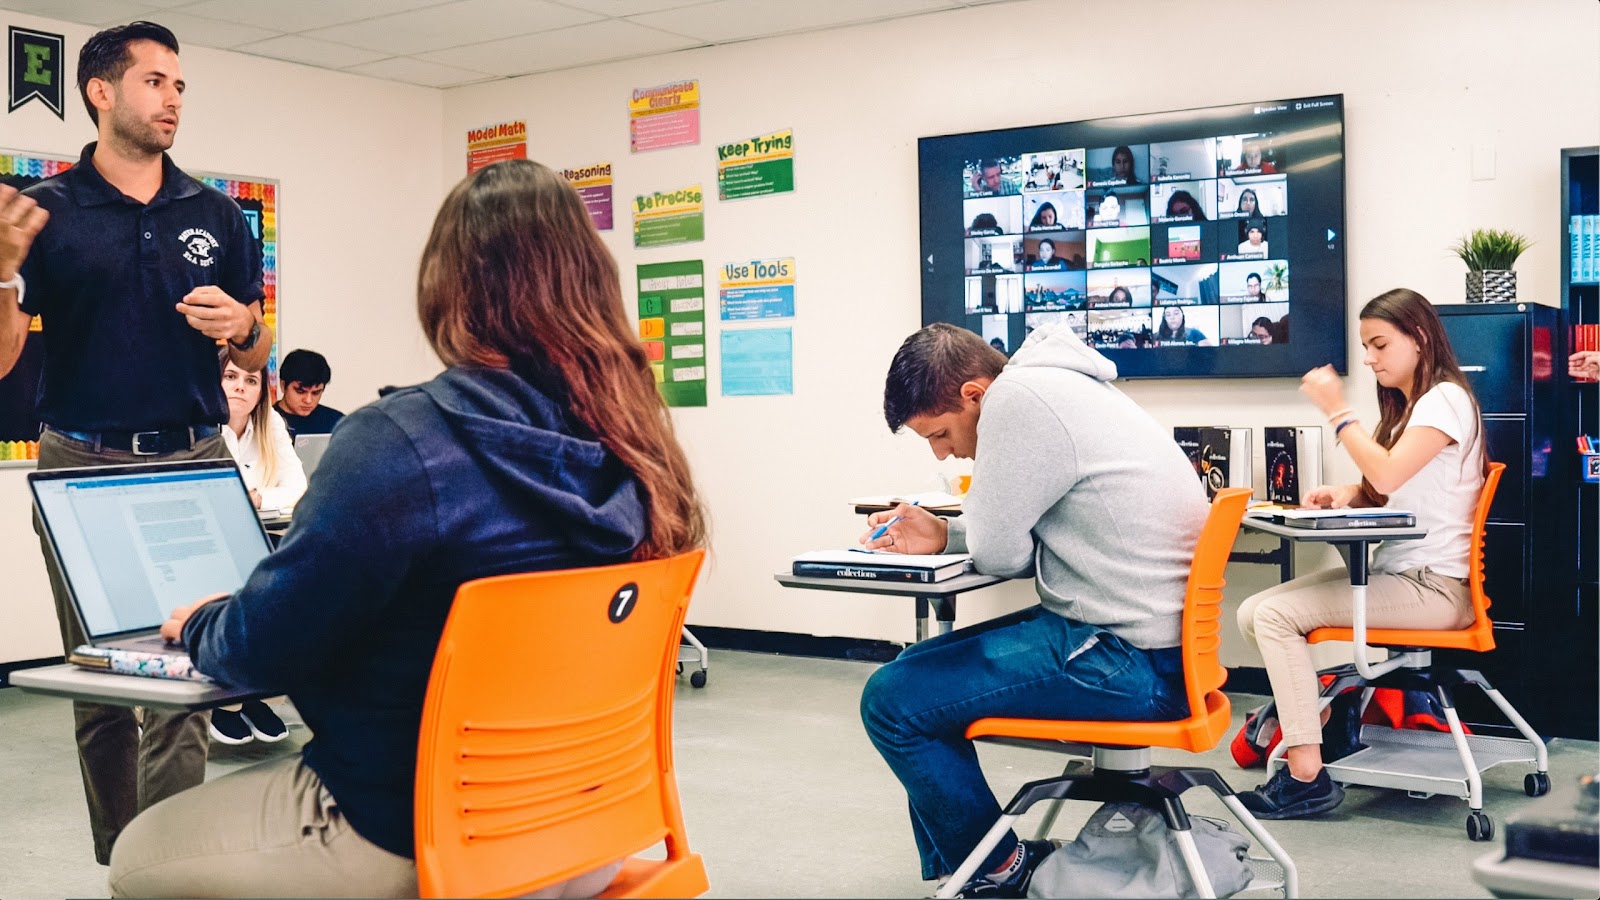 Samsung's Digital Signage in Classrooms